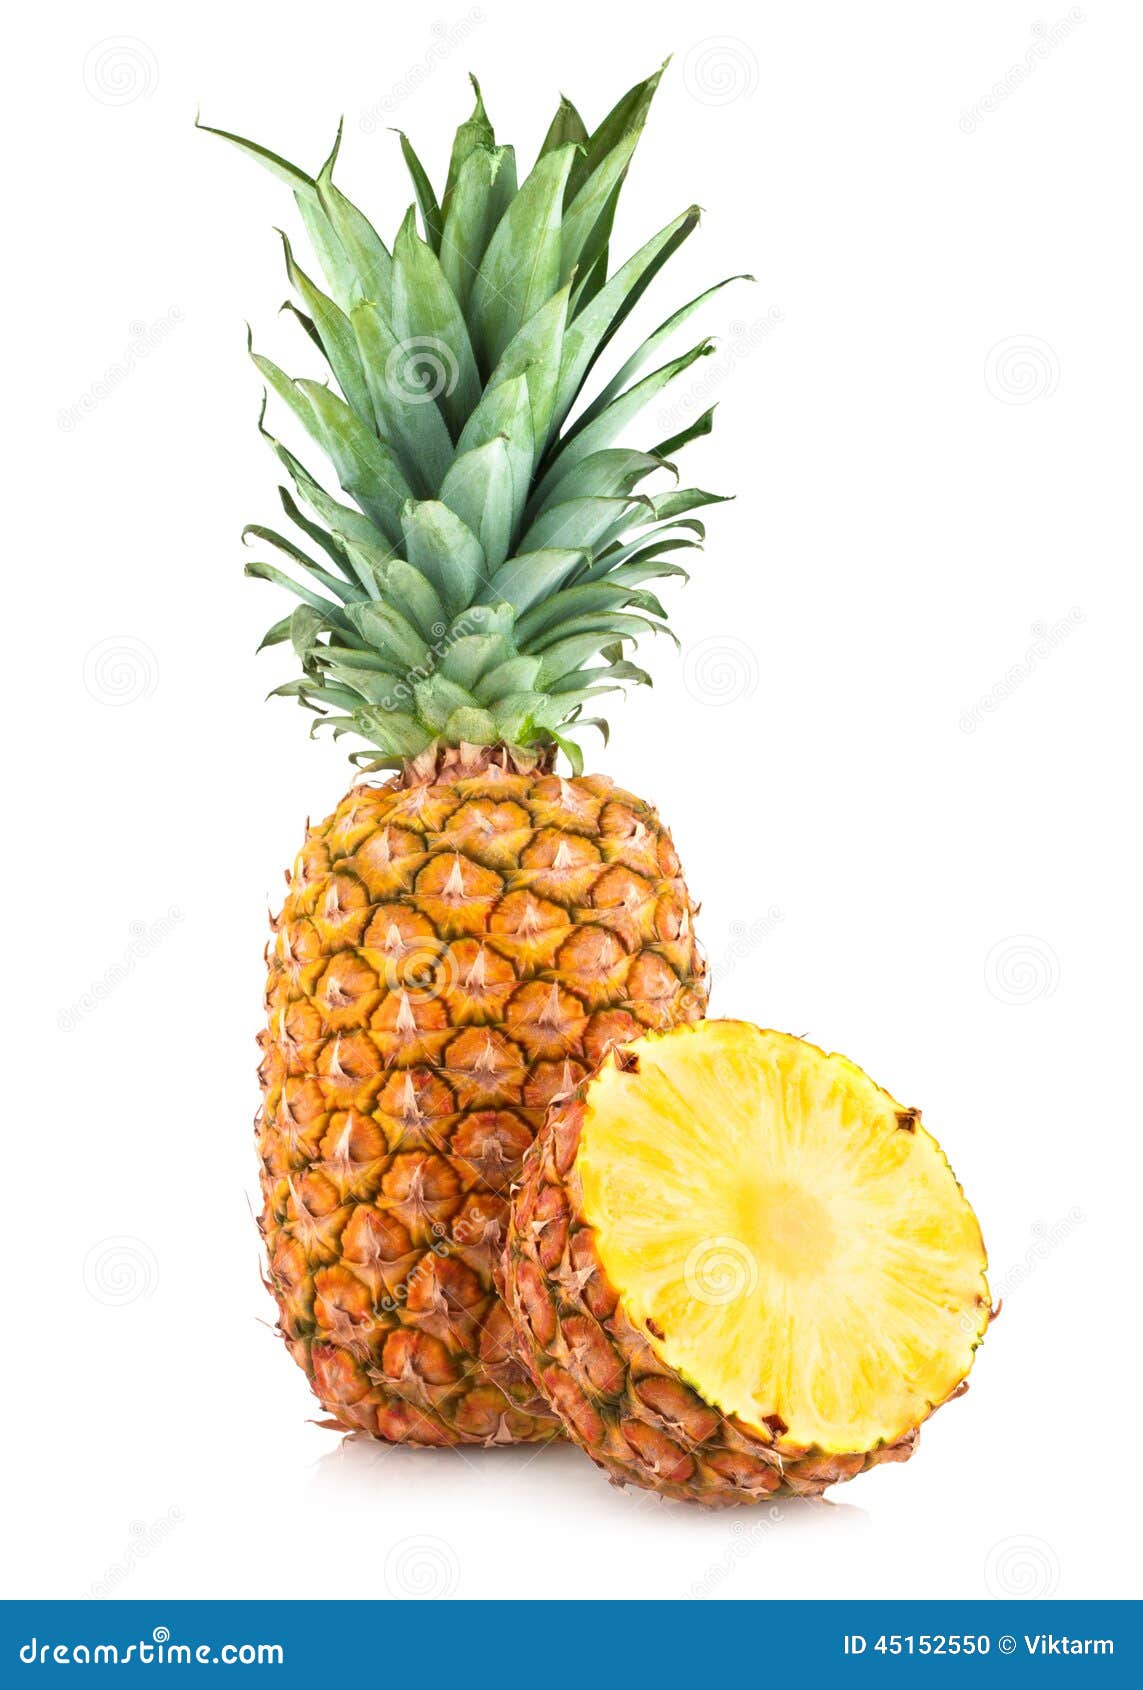 Pineapples stock photo. Image of fruits, pineapple, background - 45152550